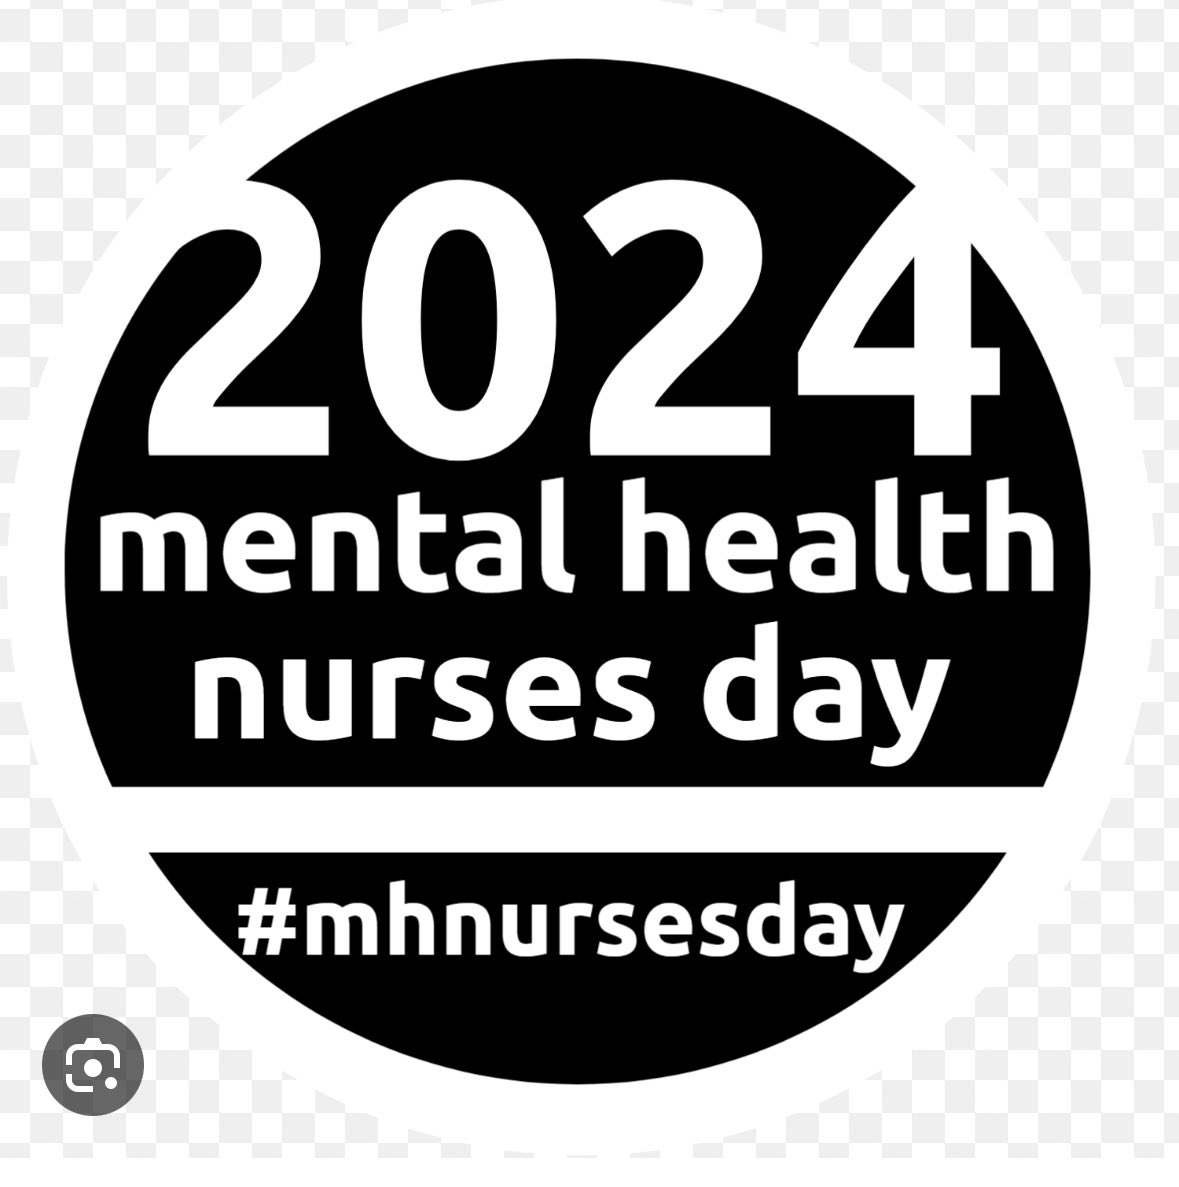 Happy Mental Health Nurses day to all our wonderful mental health nurses in Grampian who do an amazing job. Thank you for all you do. Also a fantastic day to launch our journey to #pathwaytoexcellence. Have an amazing day ! @SNGMHLD @claire42337728 @jo_mitchell21 @MHNurseRob